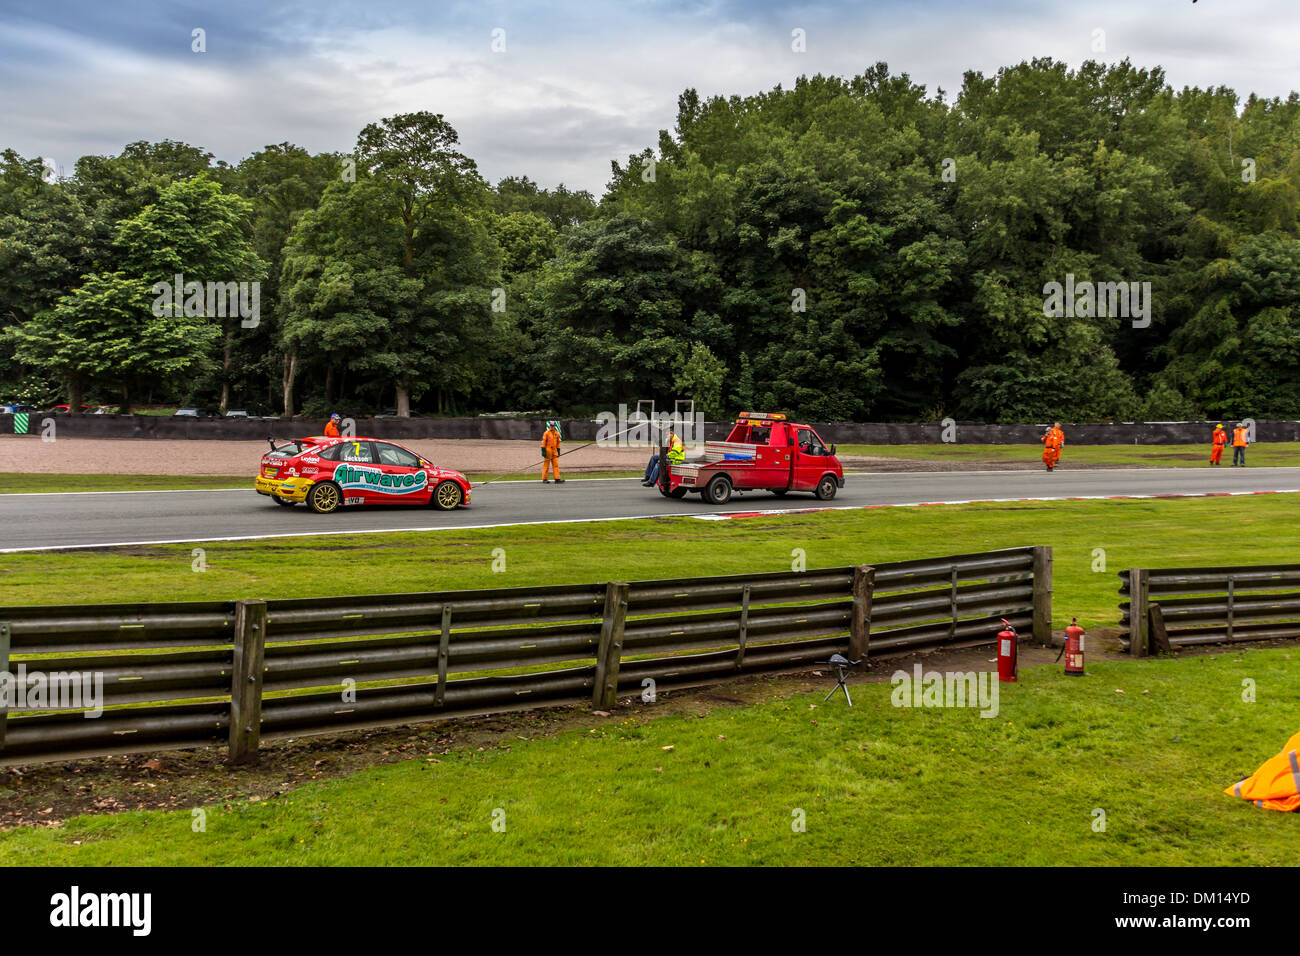 Racing car being towed and rescued by breakdown truck at car racing Stock Photo